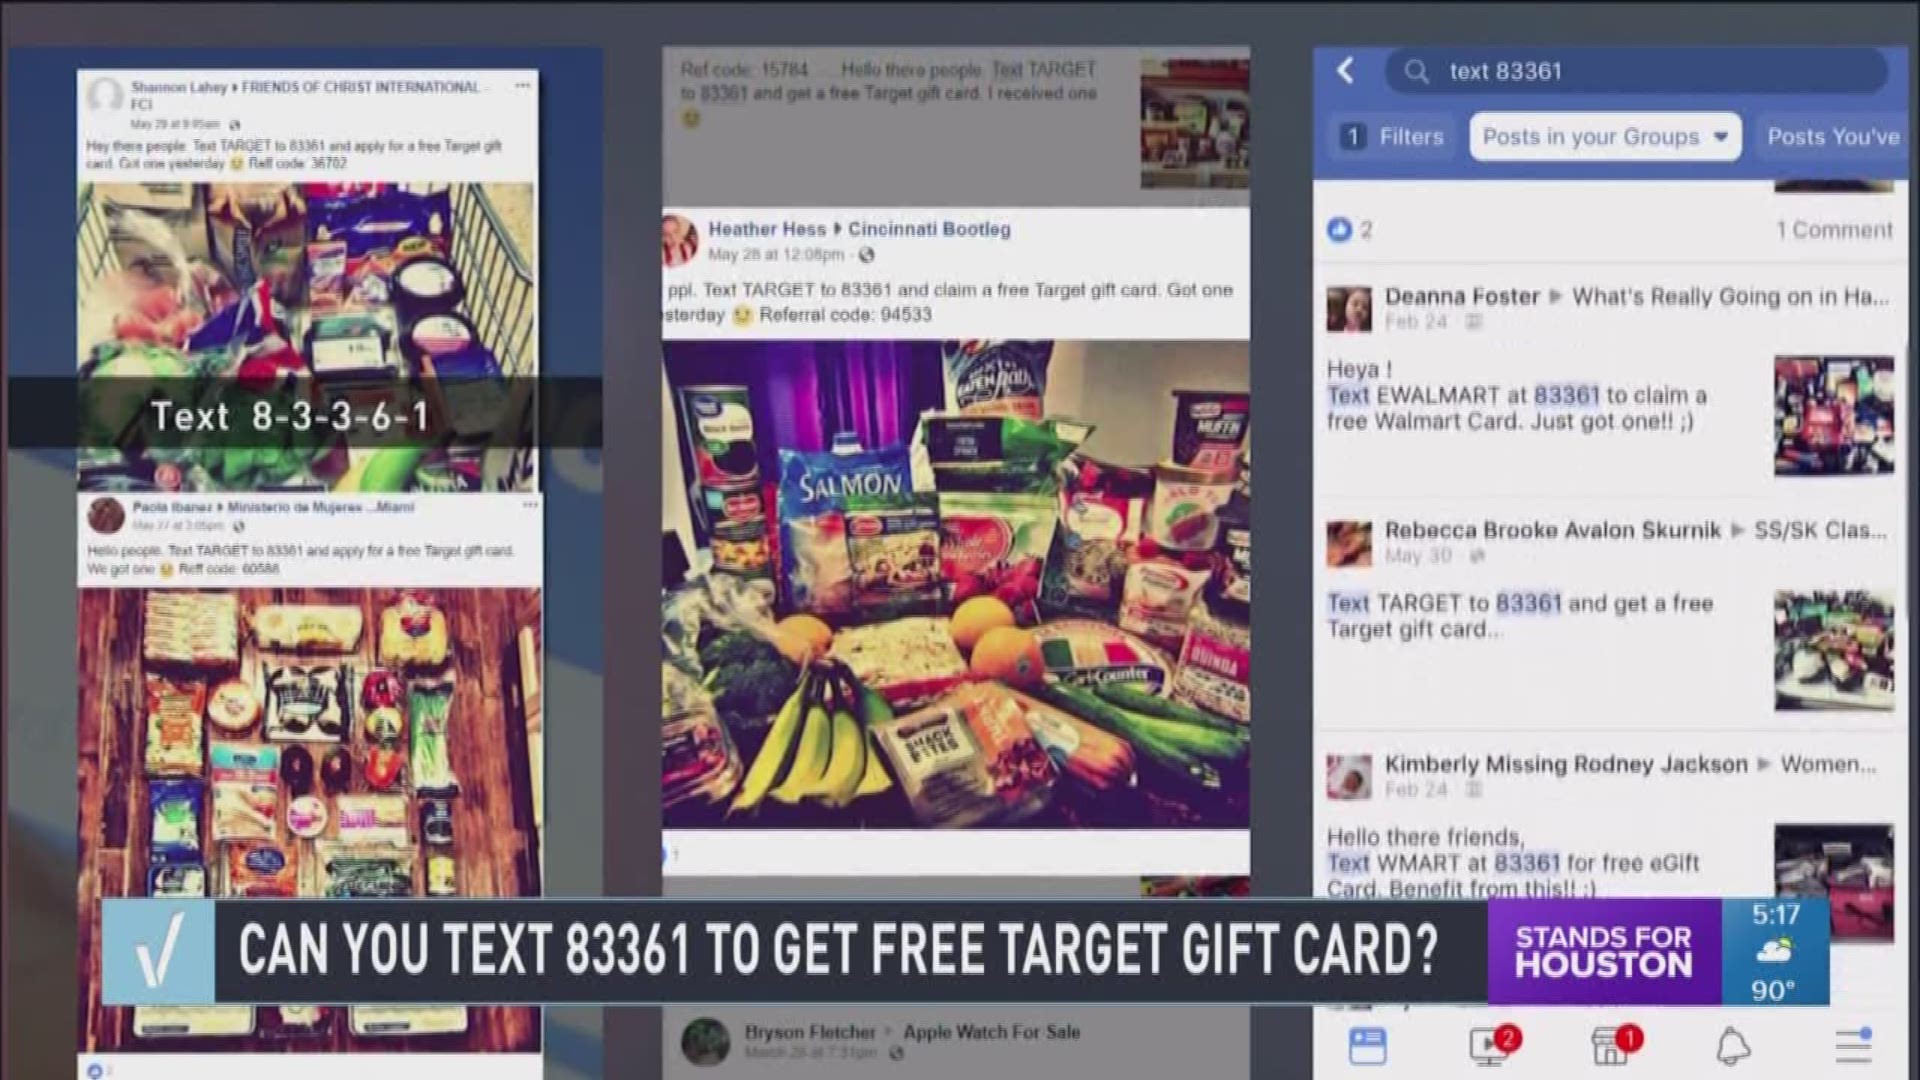 One post going around claims you can text "Target" to 83361 to get a free gift card to the store. We contacted Target and the company says it's a scam.